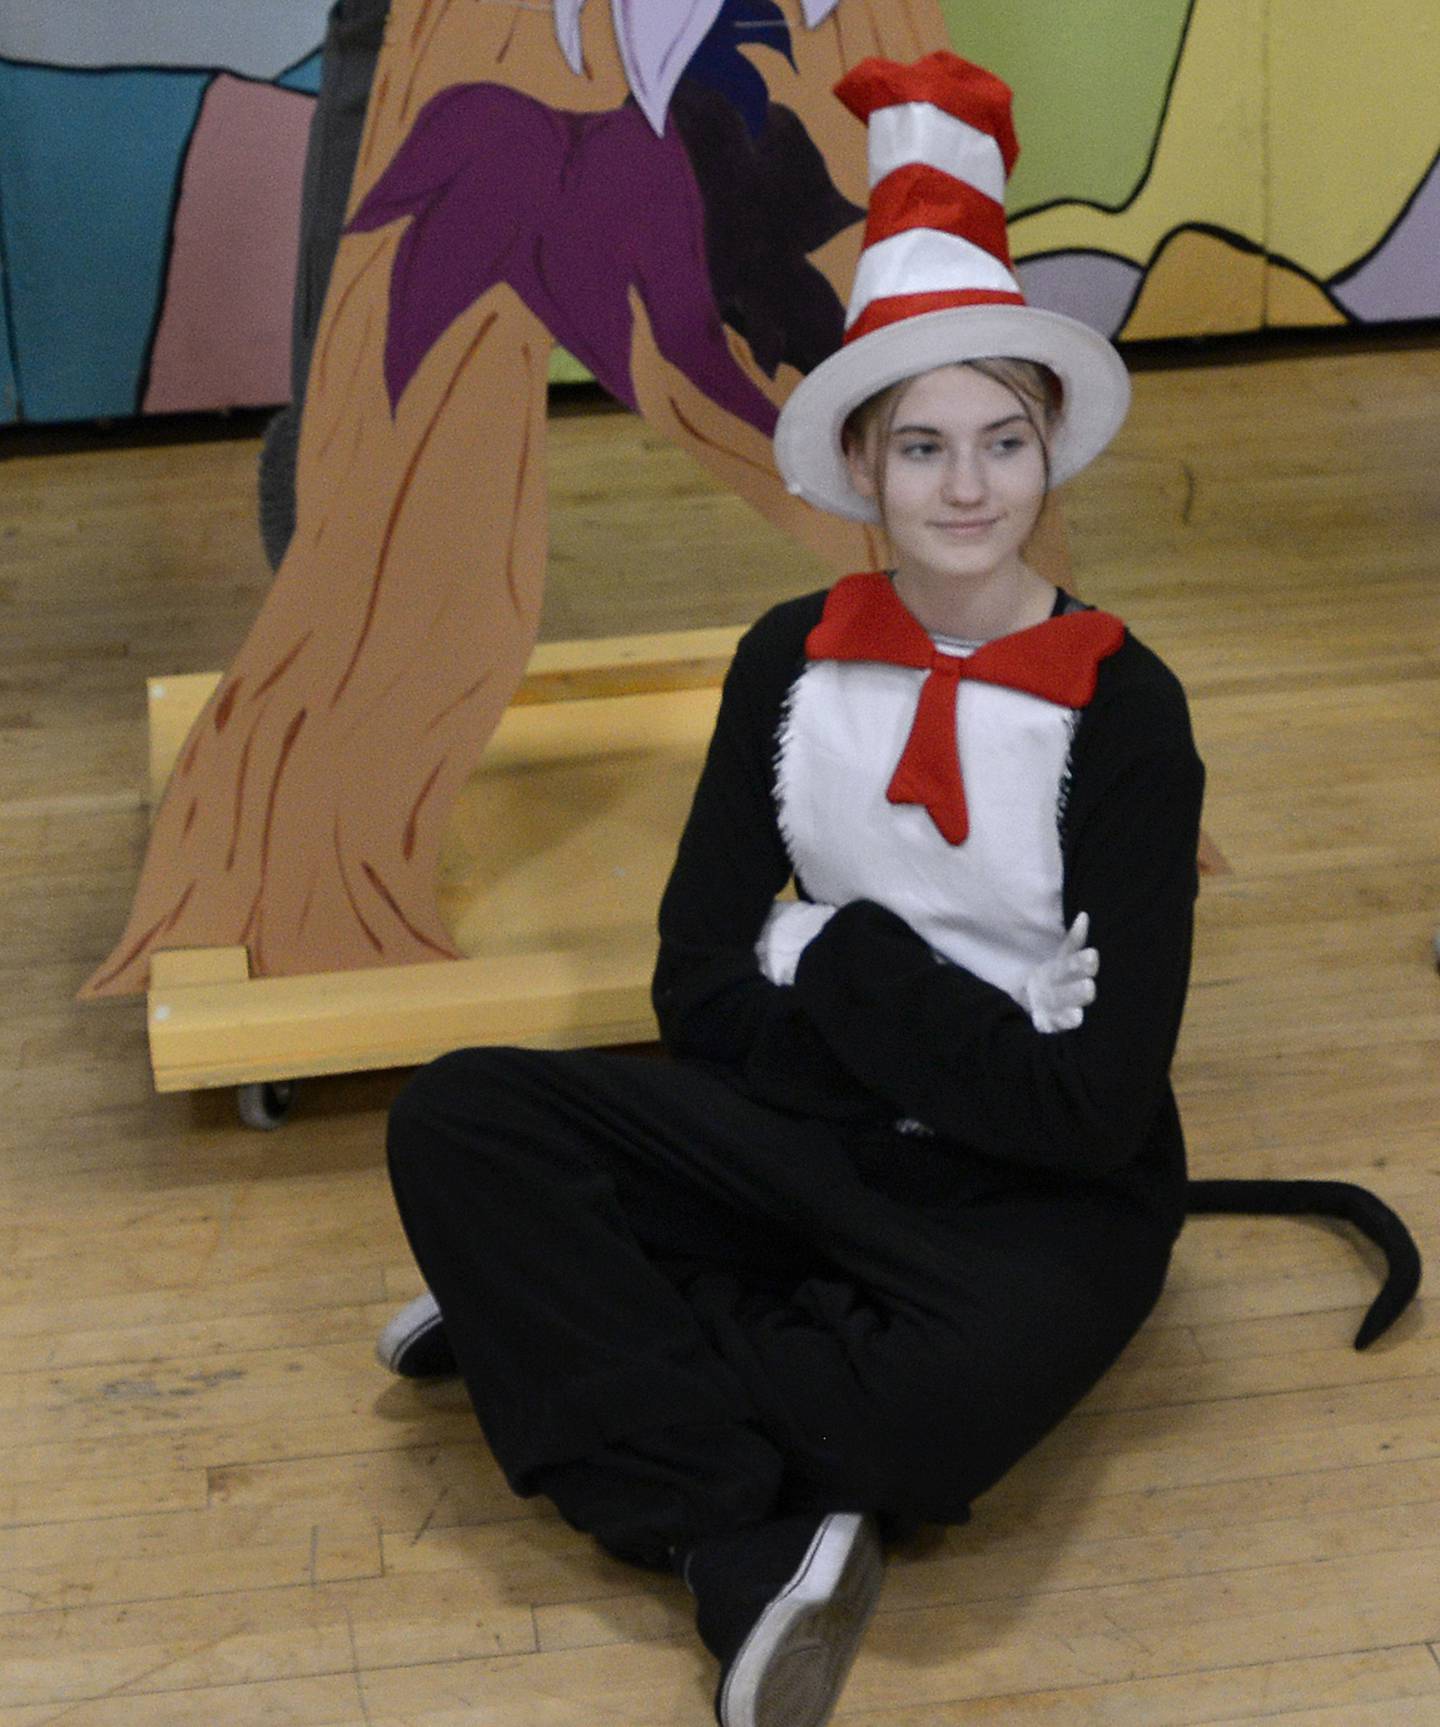 Marquette Academy student Ella Biggins as the Cat in the Hat in a scene from "Seussical the musical."